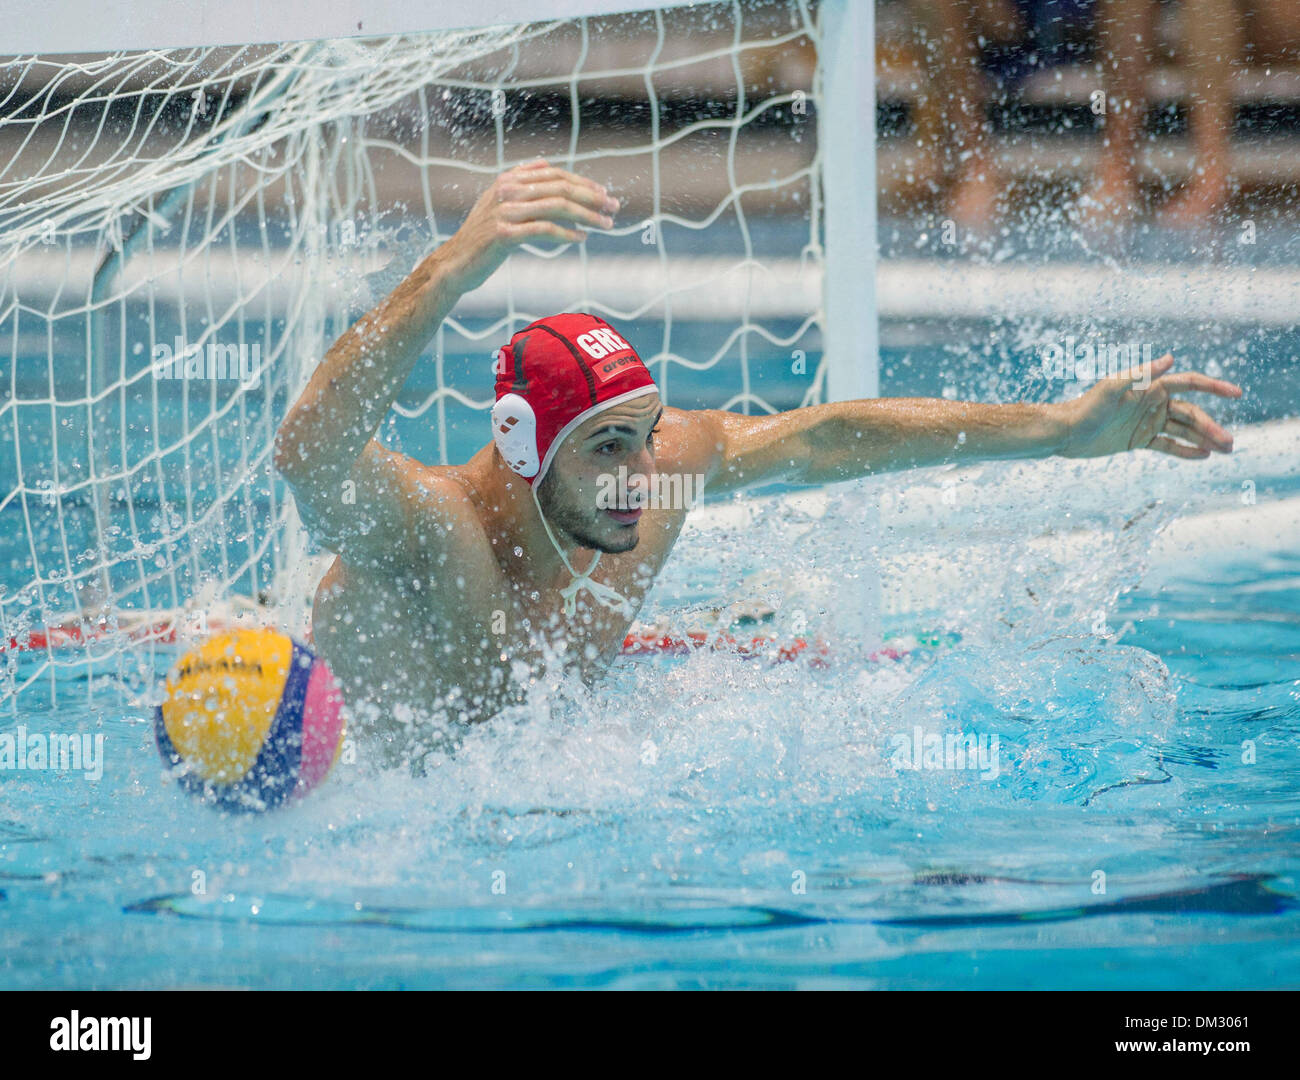 (131211) -- ZAGREB, December 11, 2013 (Xinhua) - Goalkeeper Stefanos Galanopoulos of Greece saves the penalty during the FINA Water Polo World League Group B match against Croatia in Zagreb, Croatia, December 10, 2013. Greece won 12-11 after penalty shootout.(Xinhua/Miso Lisanin)(yt) Stock Photo